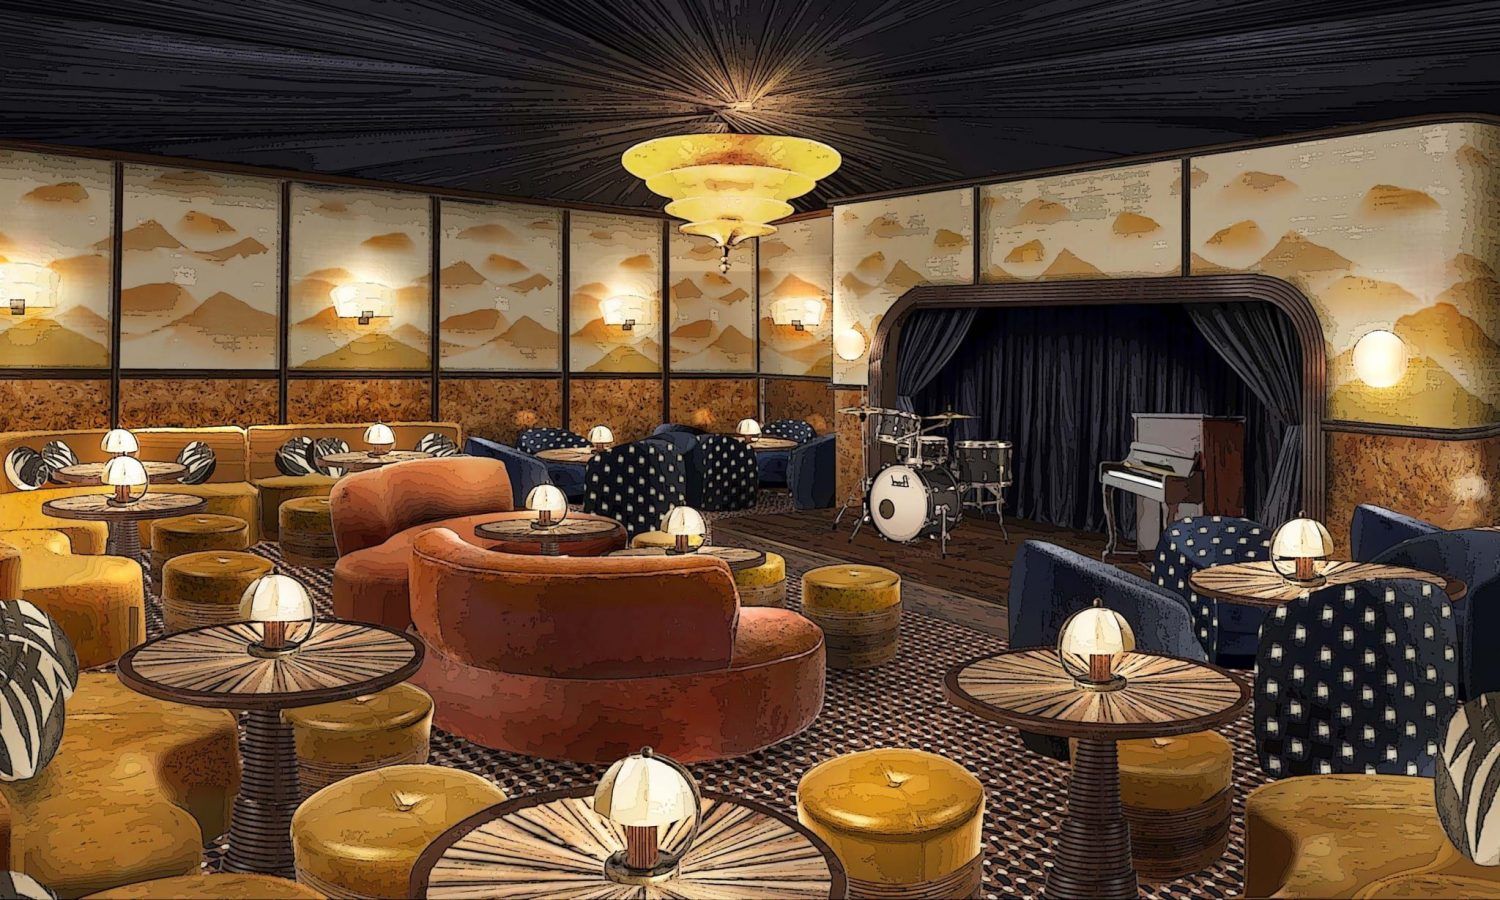 Soho House is opening a new location in Bangkok